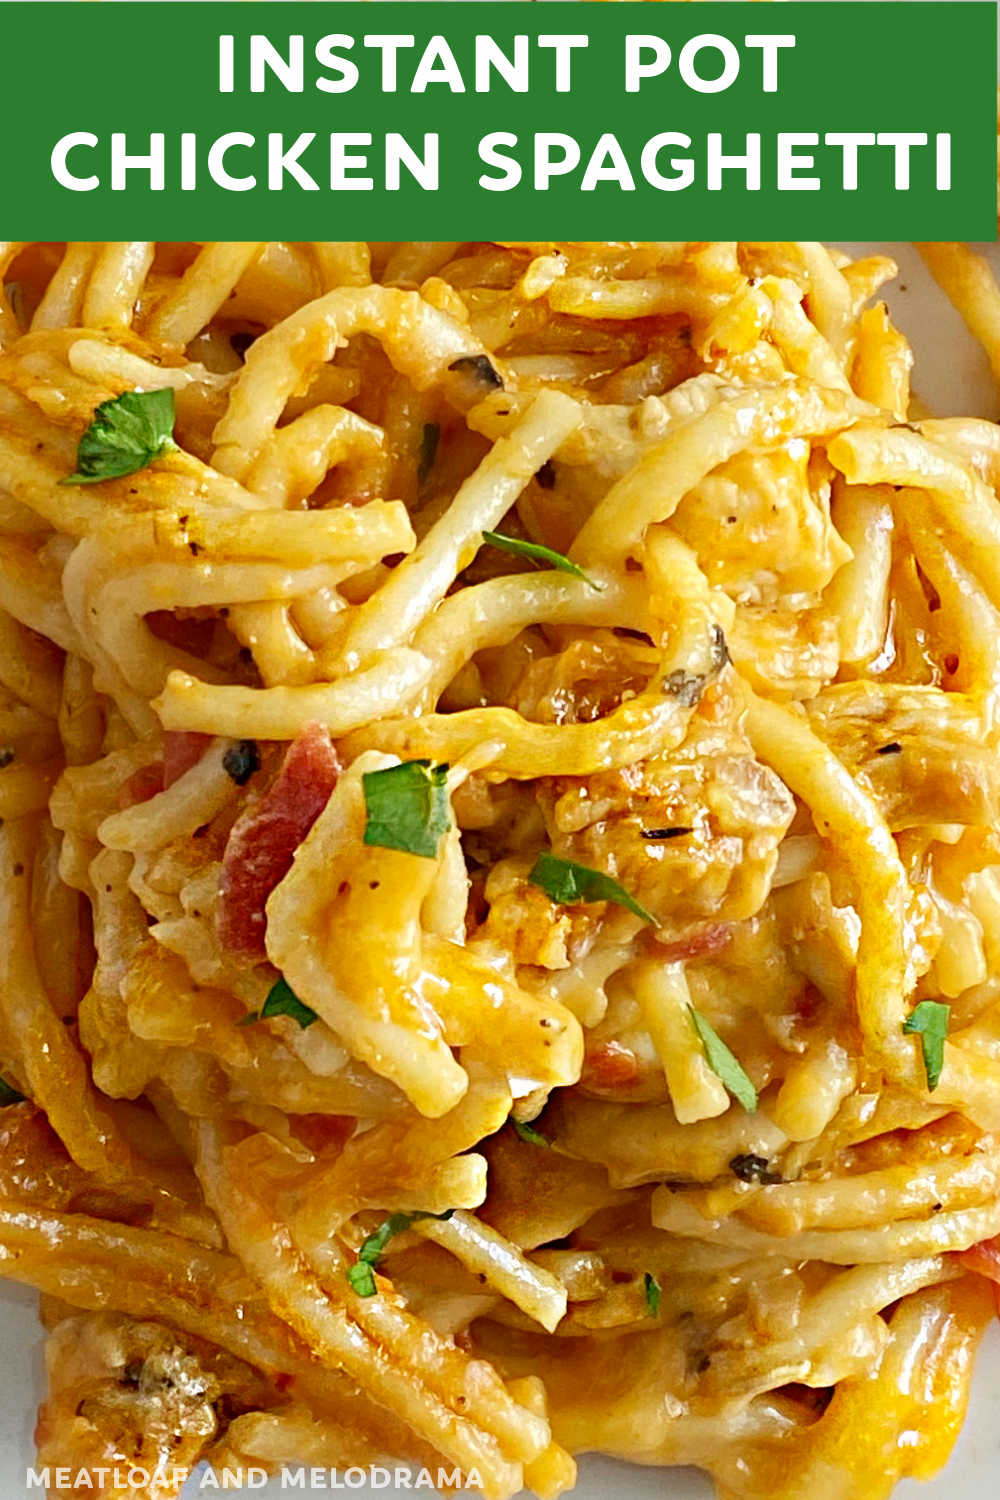 This Instant Pot Chicken Spaghetti recipe made with chicken breasts, spaghetti noodles and cheddar cheese is creamy and delicious. Your whole family will love this cheesy pasta dish, and it's perfect for an easy weeknight dinner! via @meamel